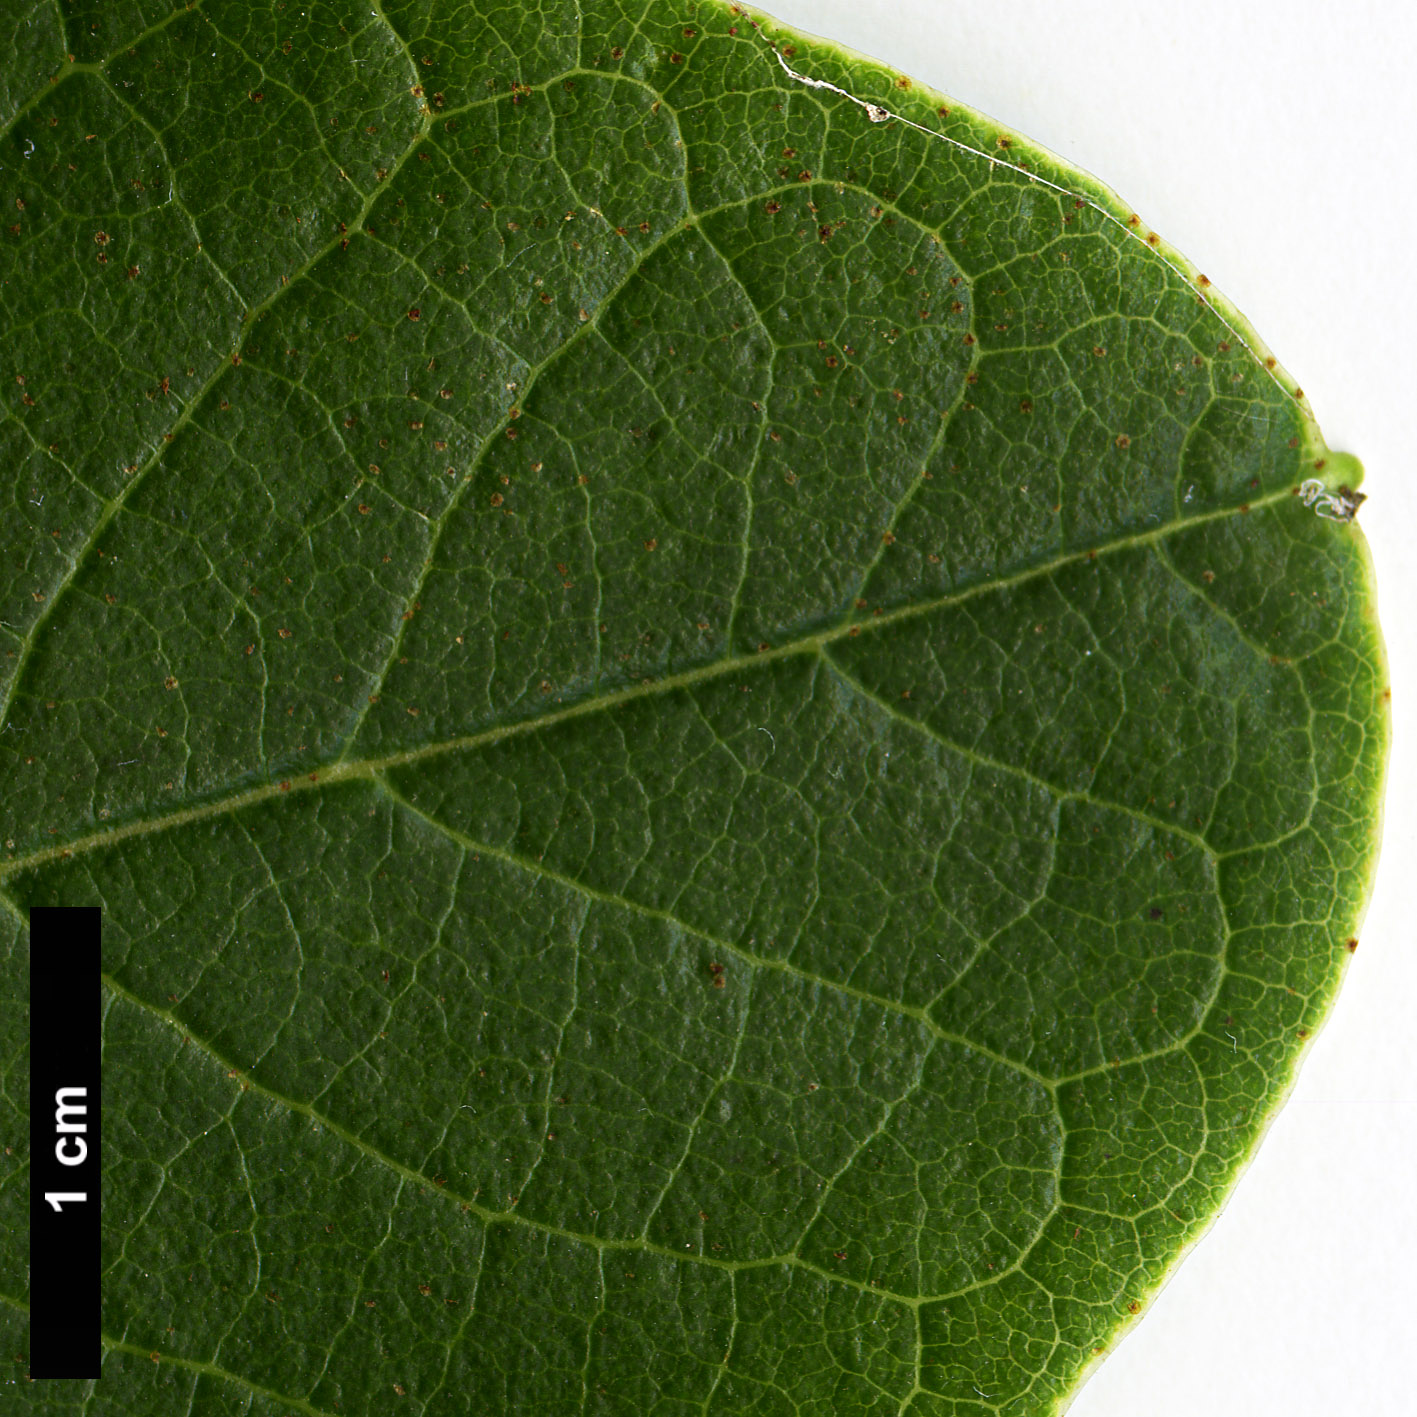 High resolution image: Family: Ericaceae - Genus: Rhododendron - Taxon: megacalyx